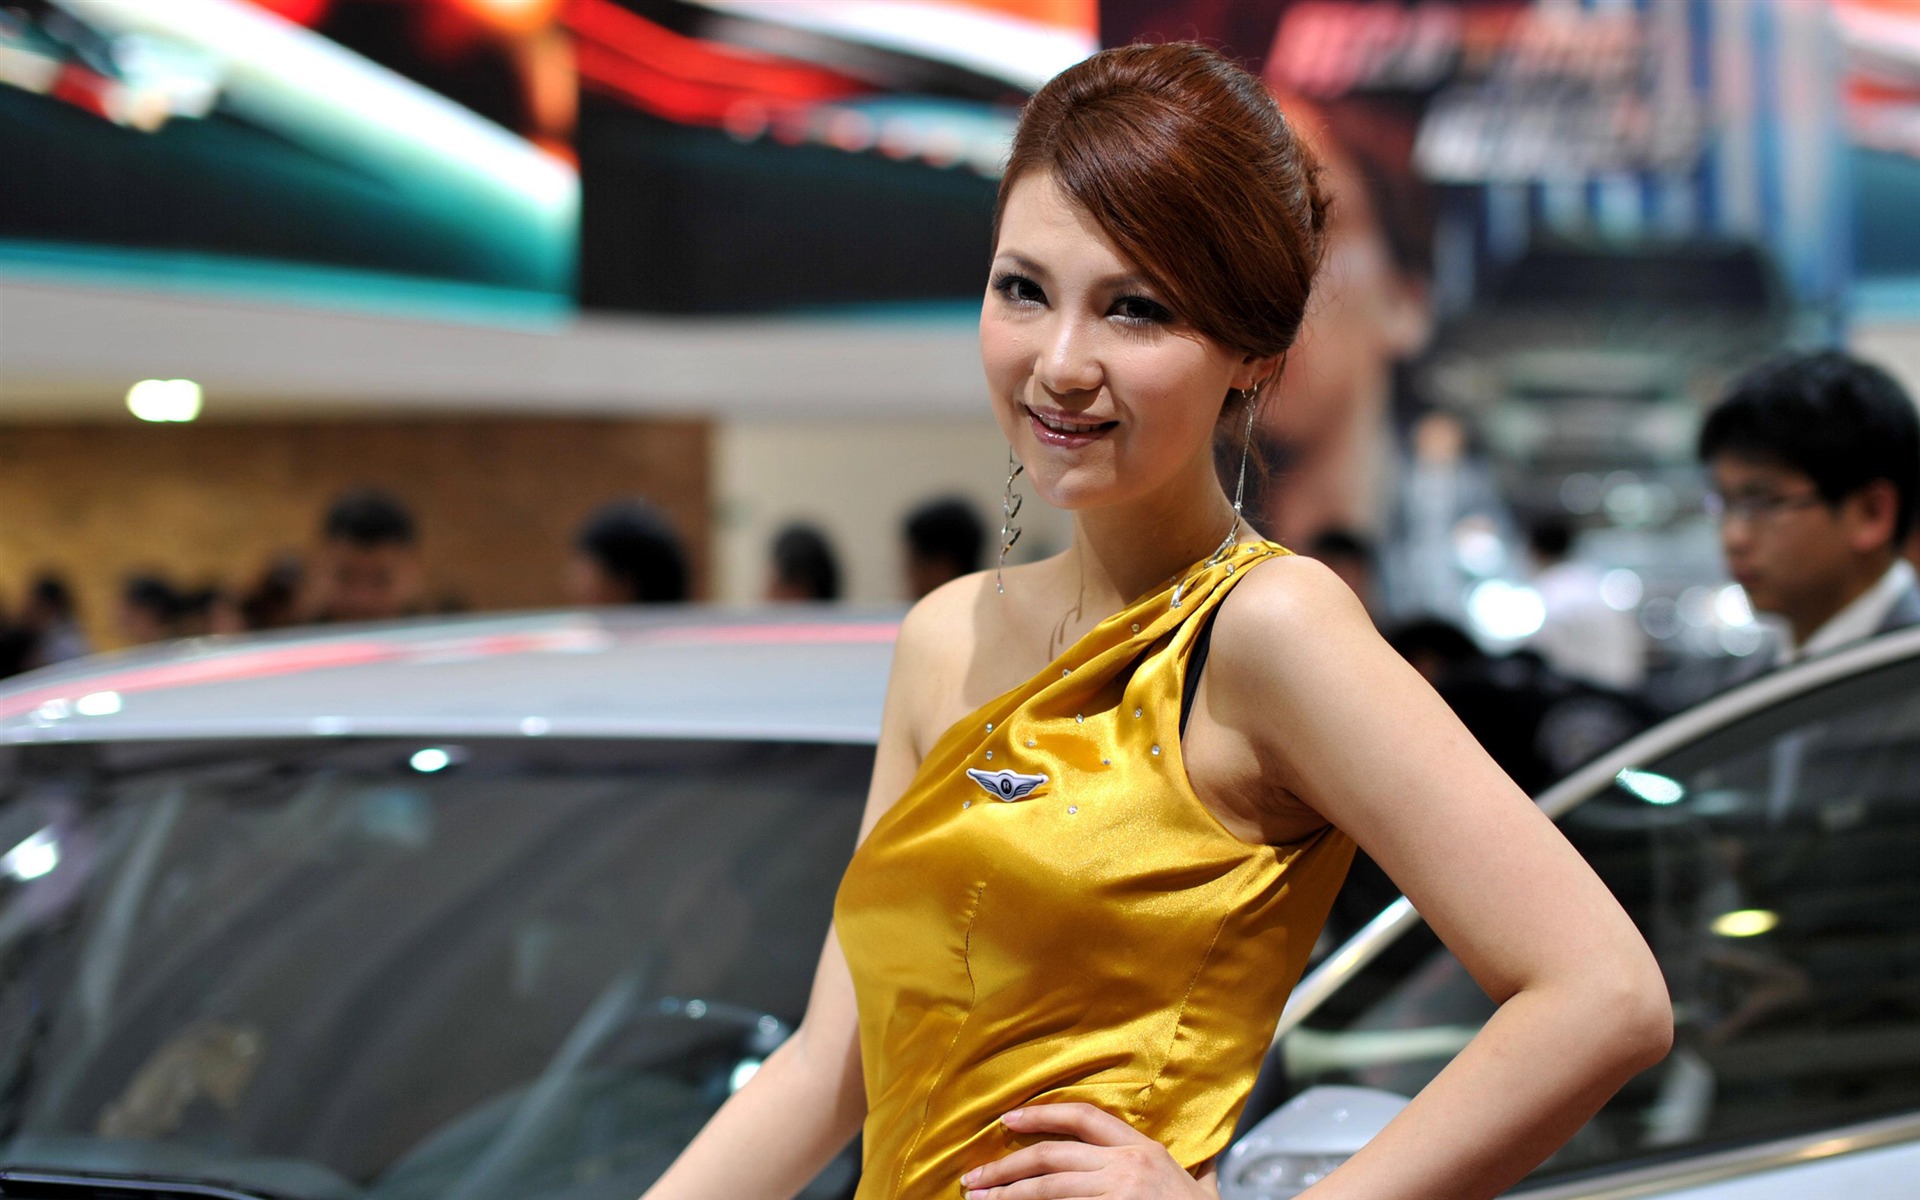 2010 Beijing Auto Show beauty (Kuei-east of the first works) #1 - 1920x1200